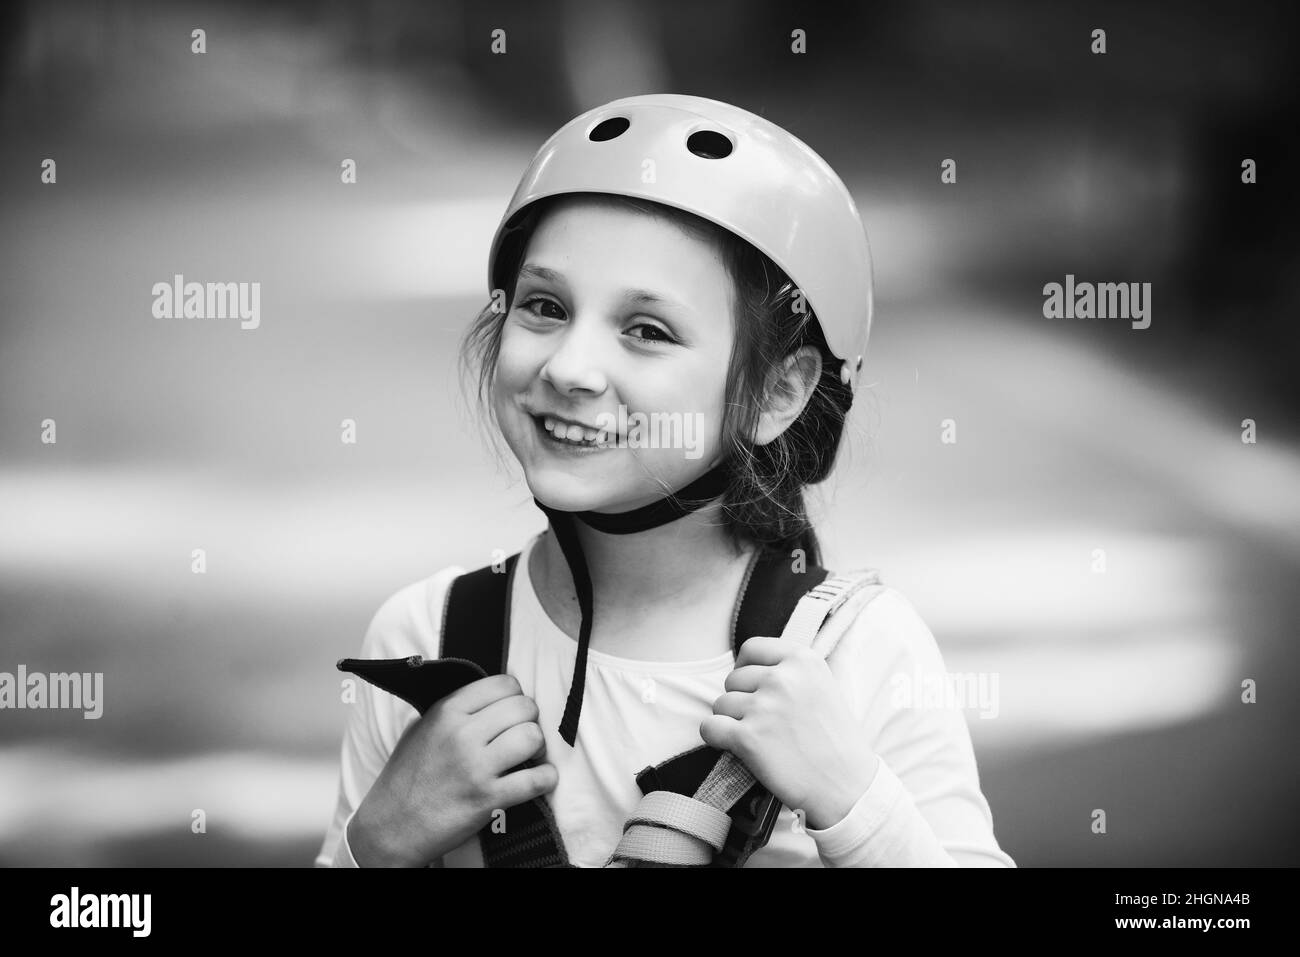 Little girl climbing in adventure activity park with helmet and safety equipment. Little girl climbing on high rope park. Helmet and safety equipment. Stock Photo